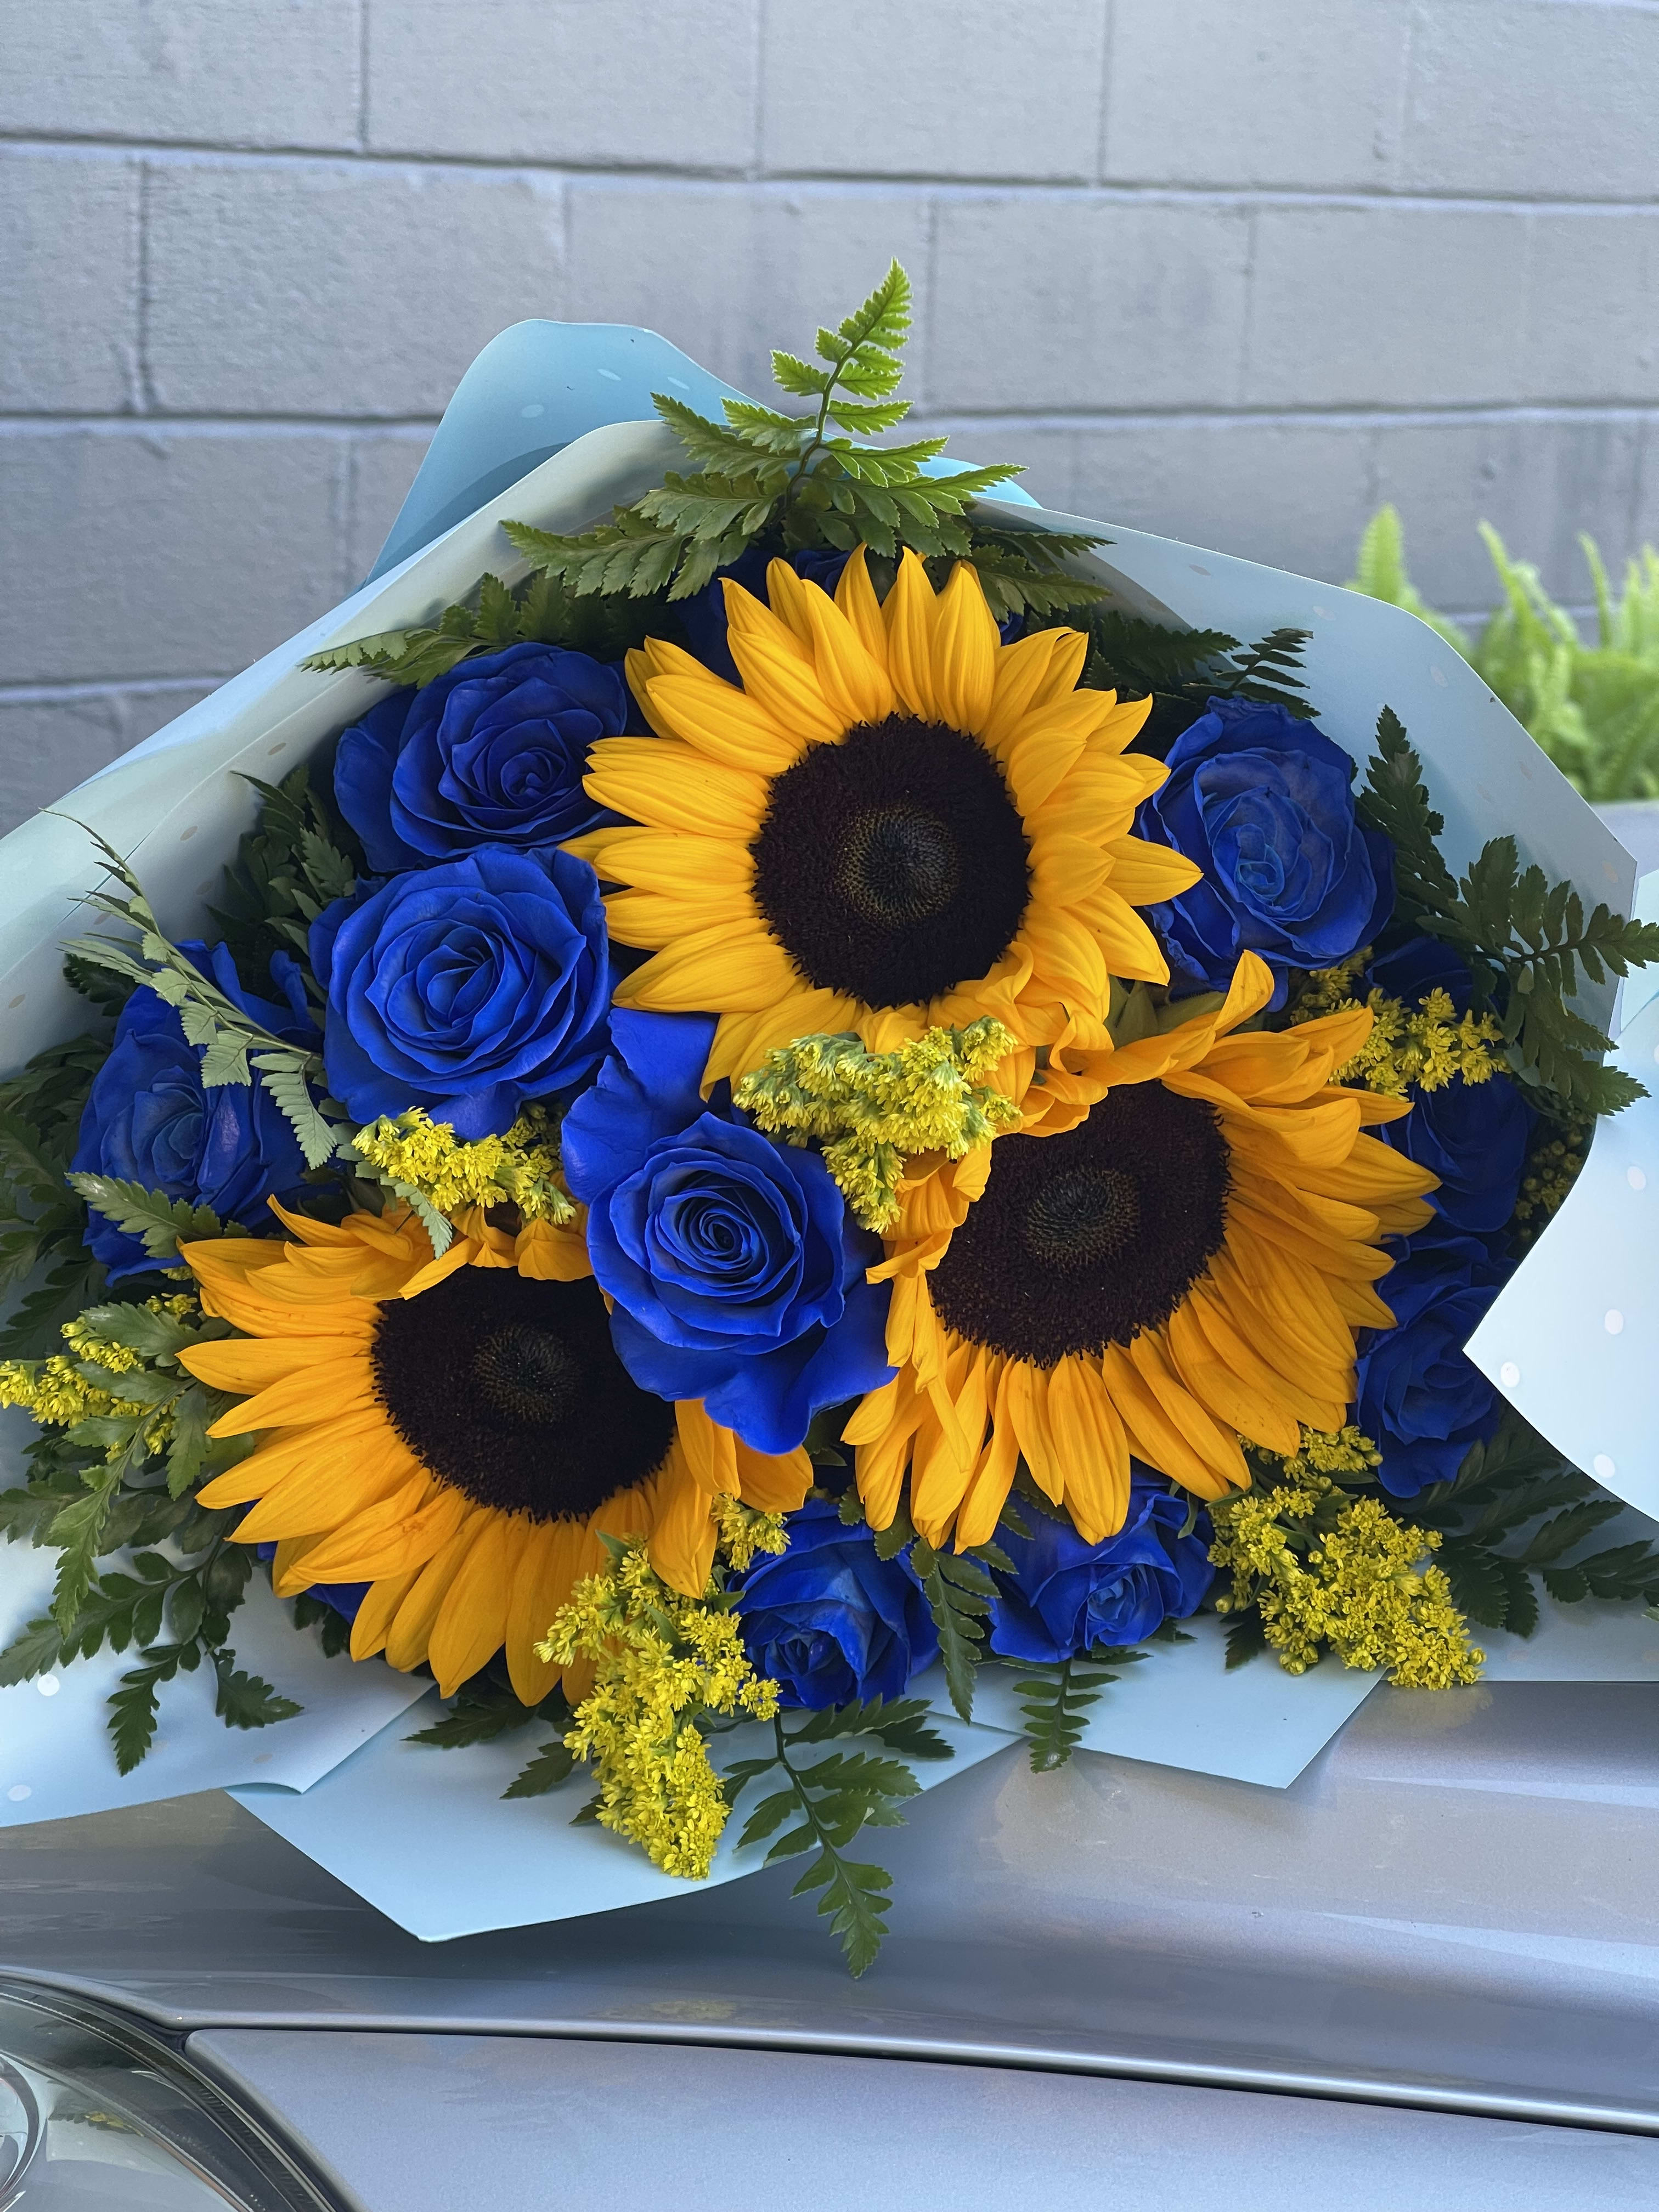 The sunflower and rose bouquet  - This handheld bouquet is created with beautiful royal blue roses and sunflower mix 